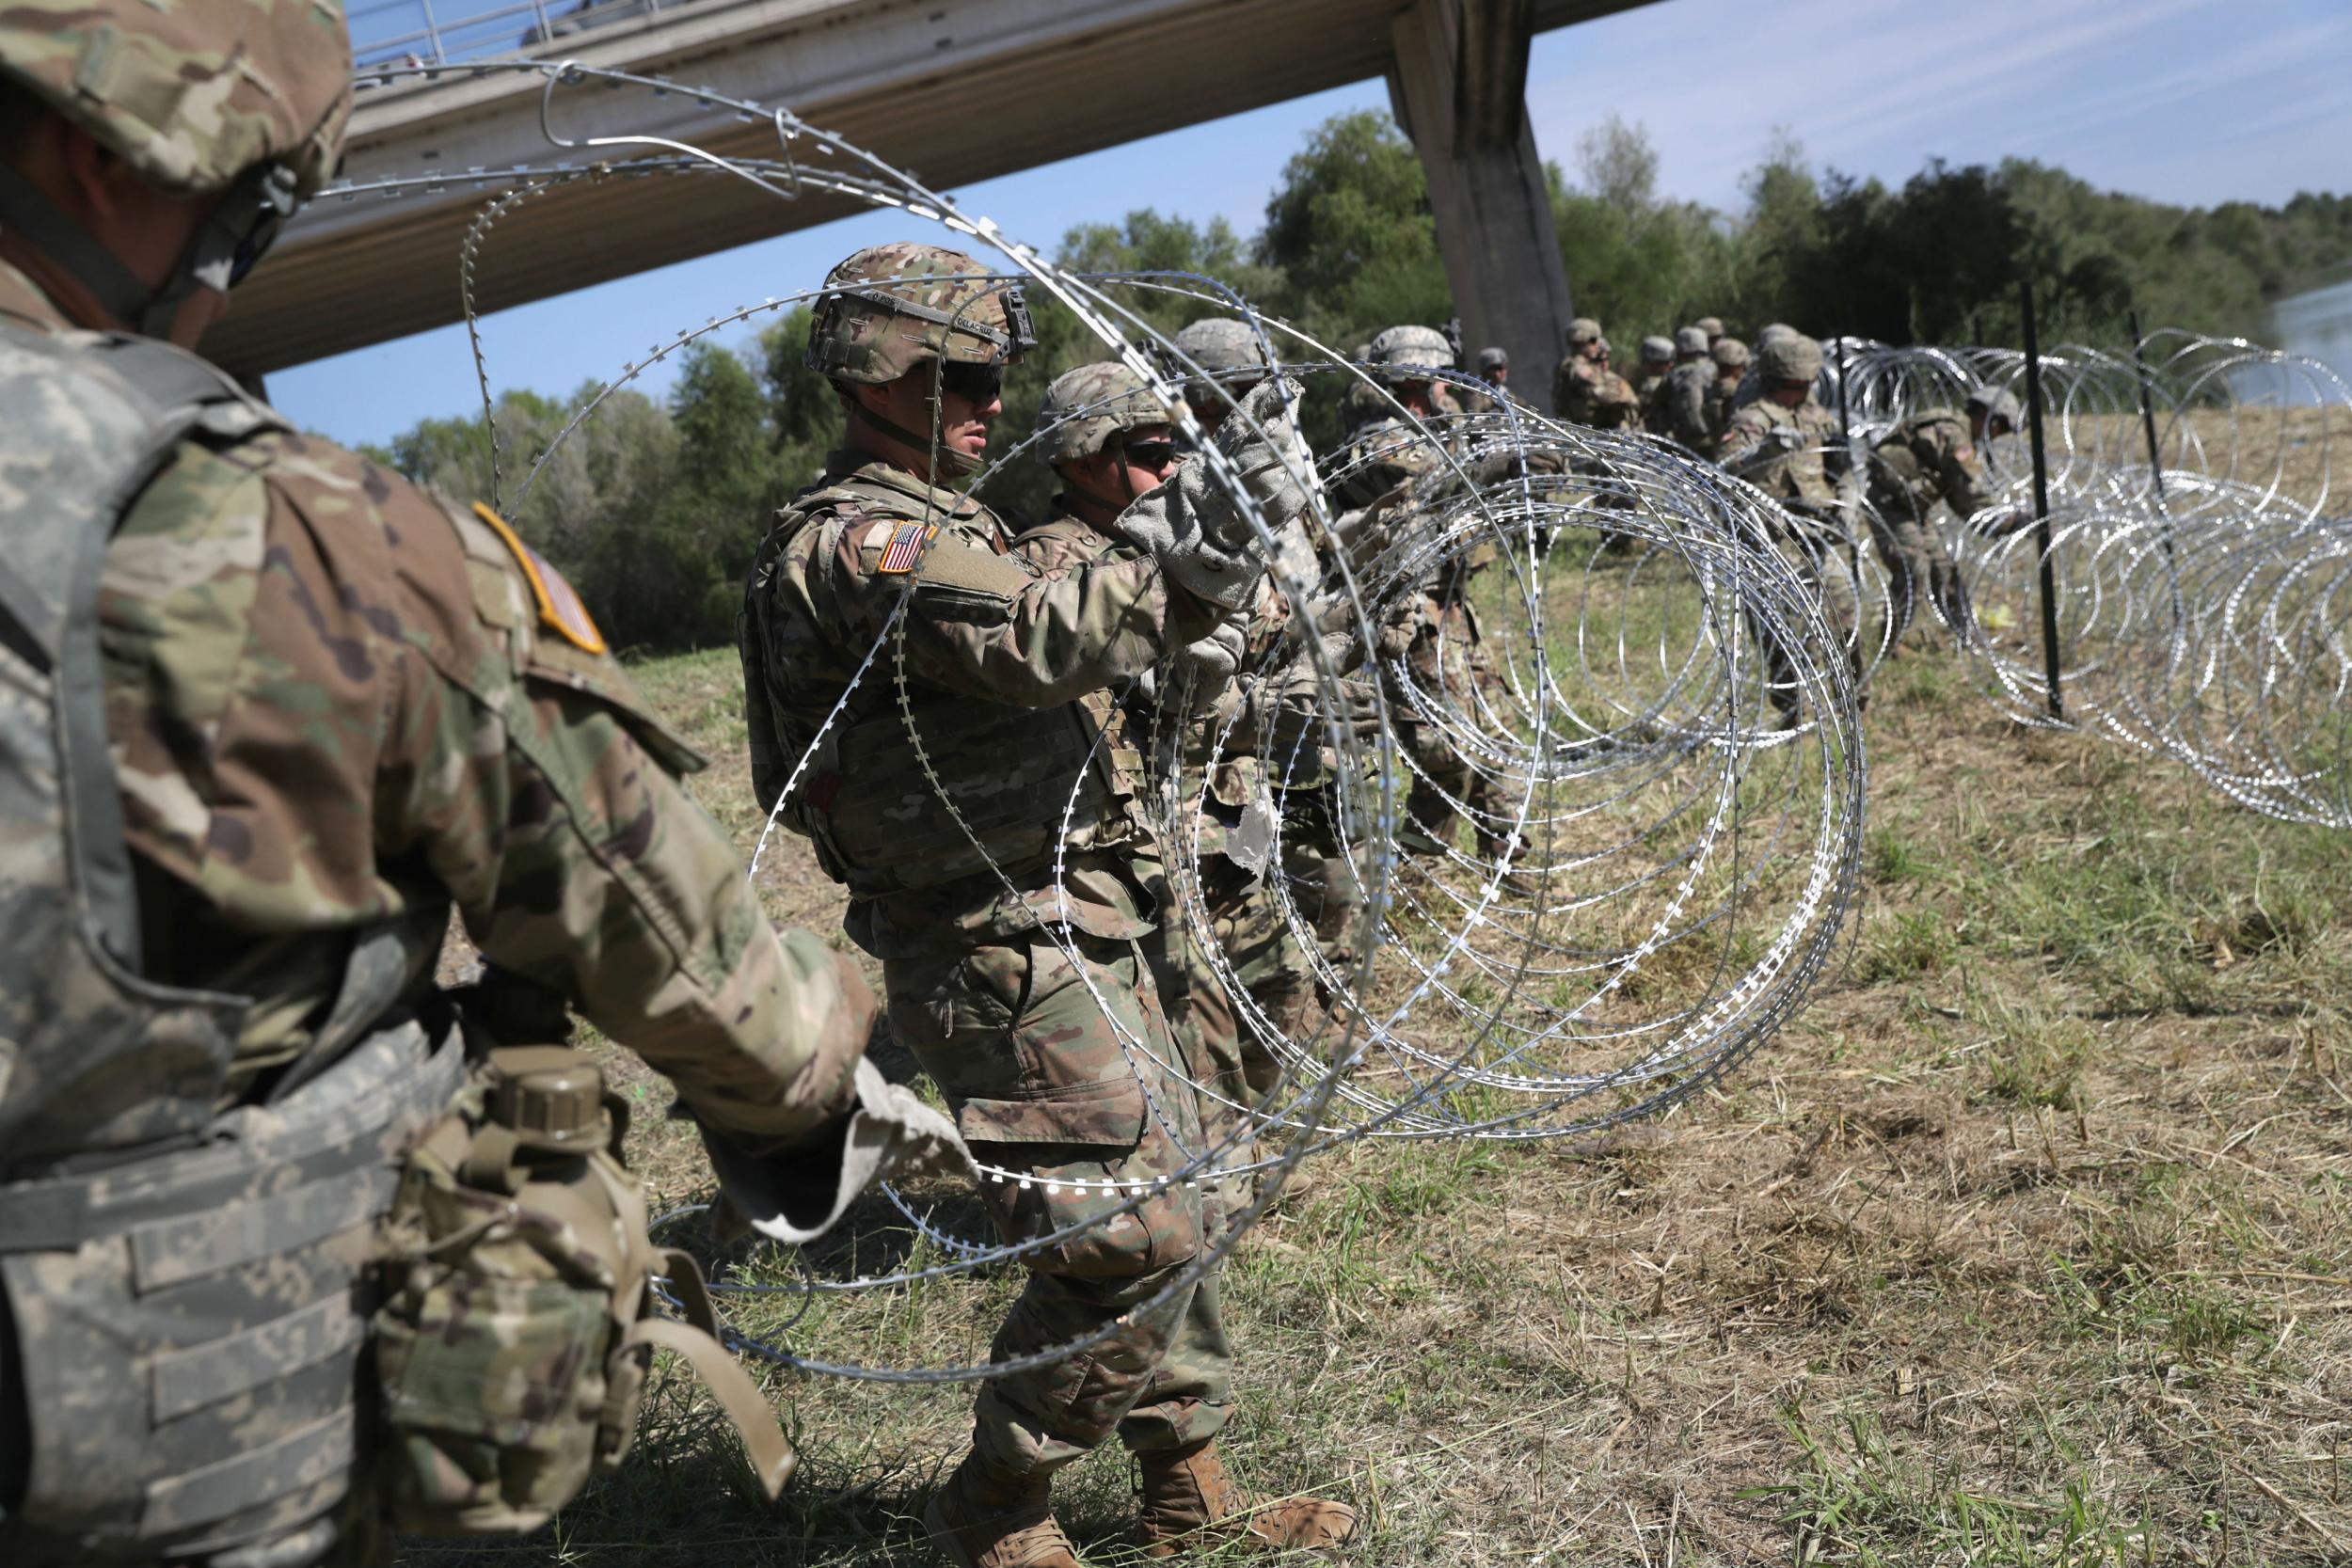 US troops dispatched by Trump install razor wire on Mexico border in &apos;political stunt&apos; days ahead of midterm elections